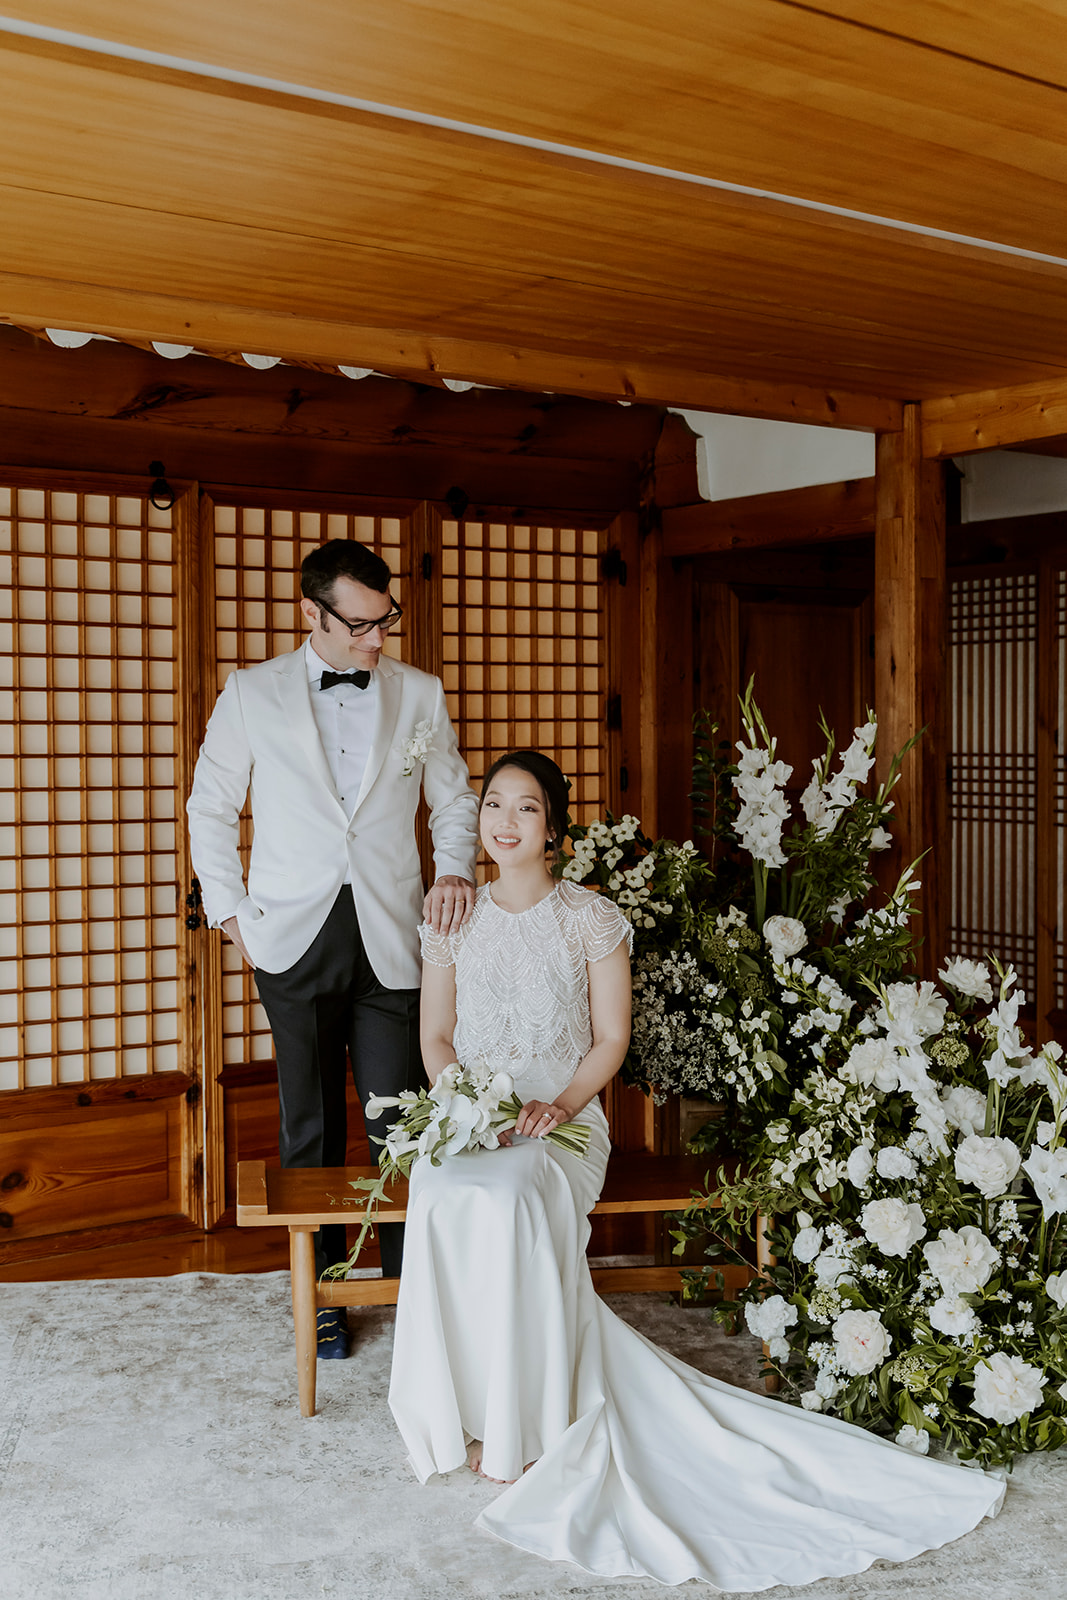 A man and woman in a traditional hanok posing in their wedding attire.